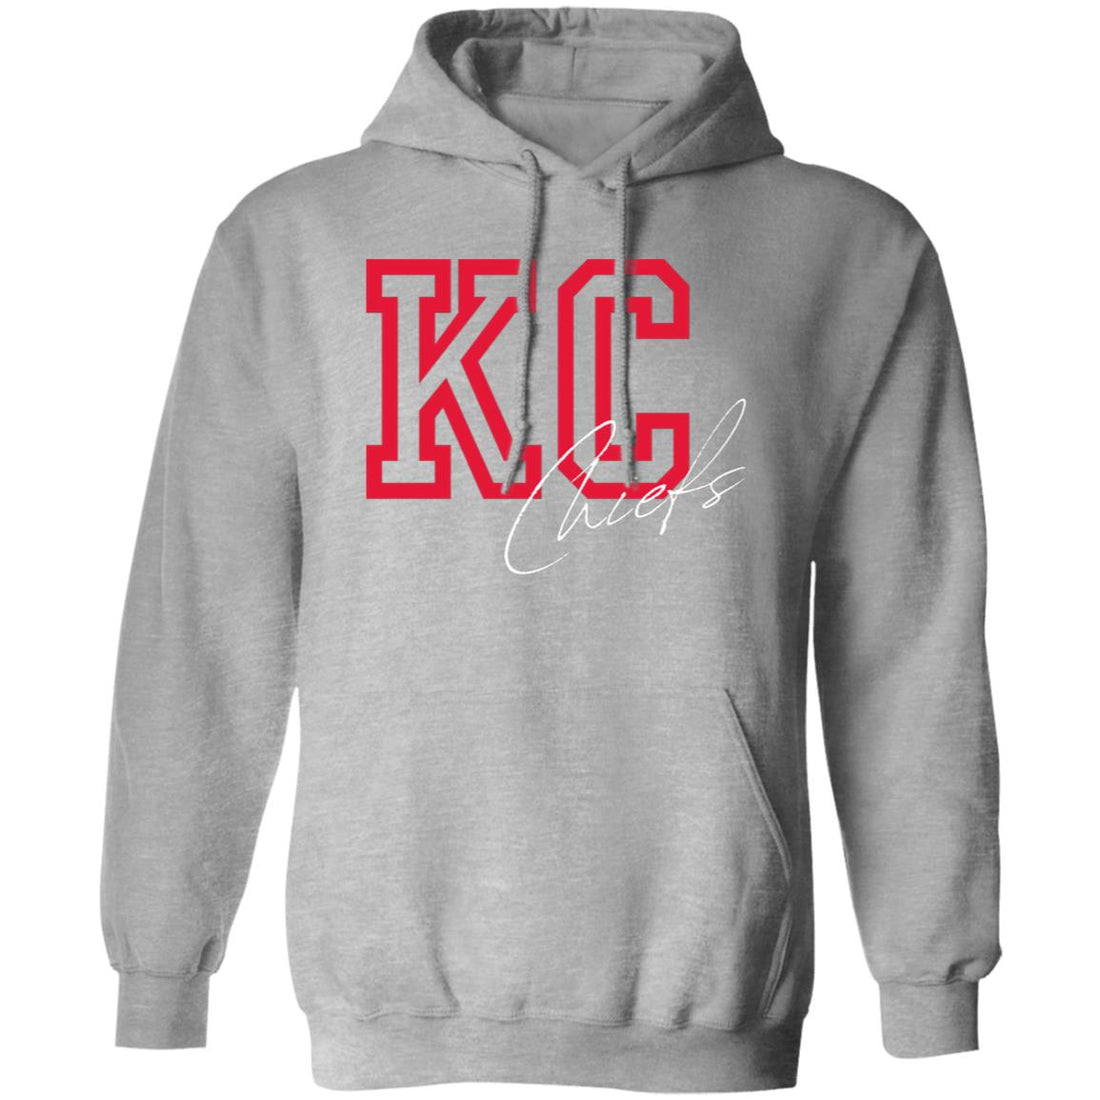 KC KC Pullover Hoodie - Sweatshirts - Positively Sassy - KC KC Pullover Hoodie